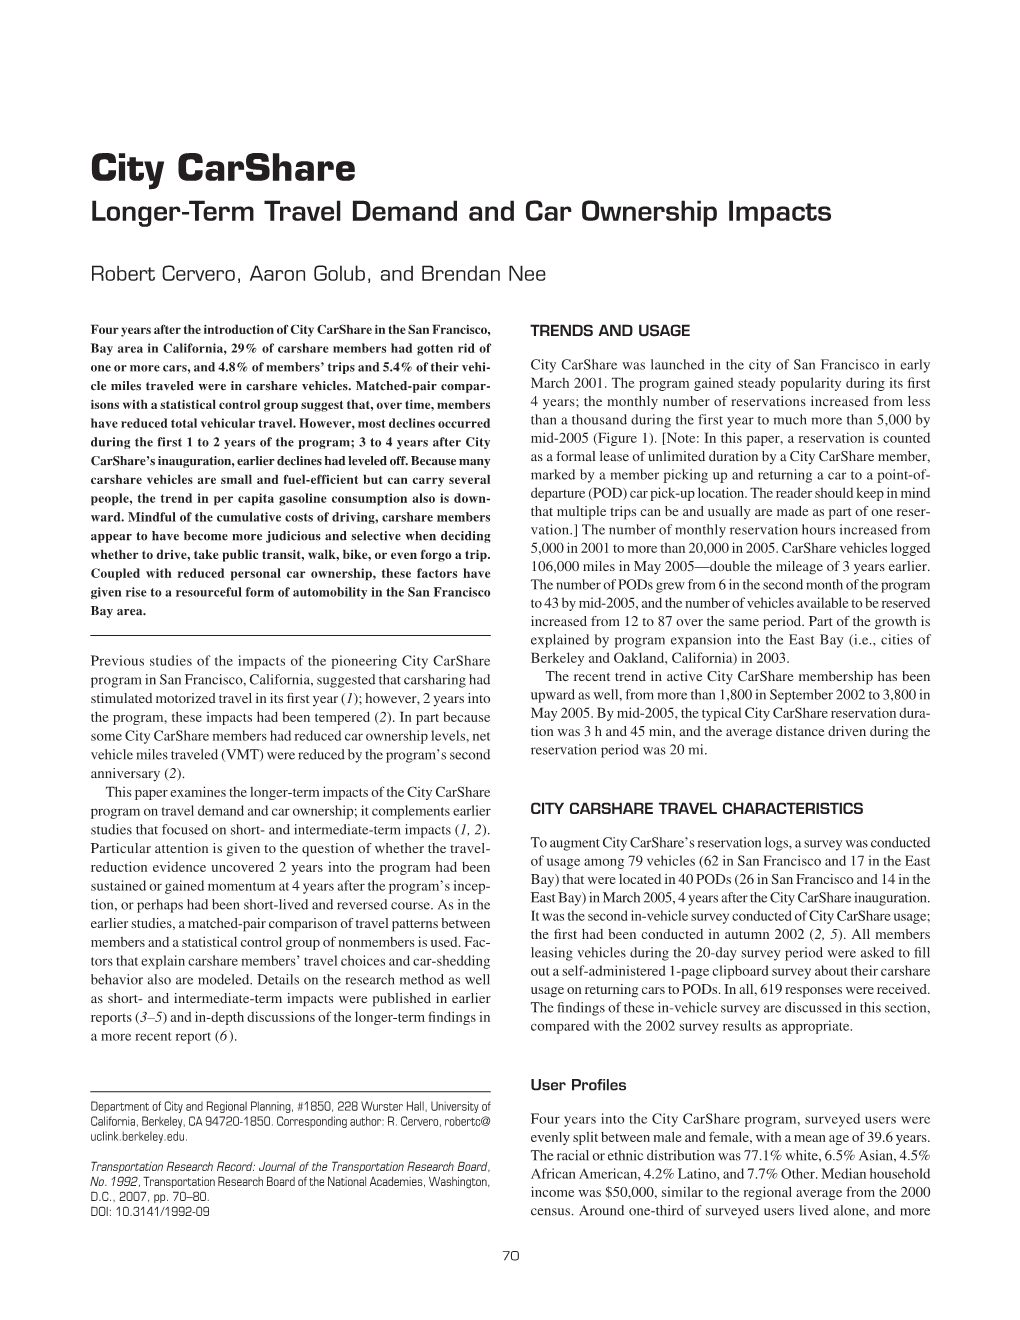 City Carshare Longer-Term Travel Demand and Car Ownership Impacts